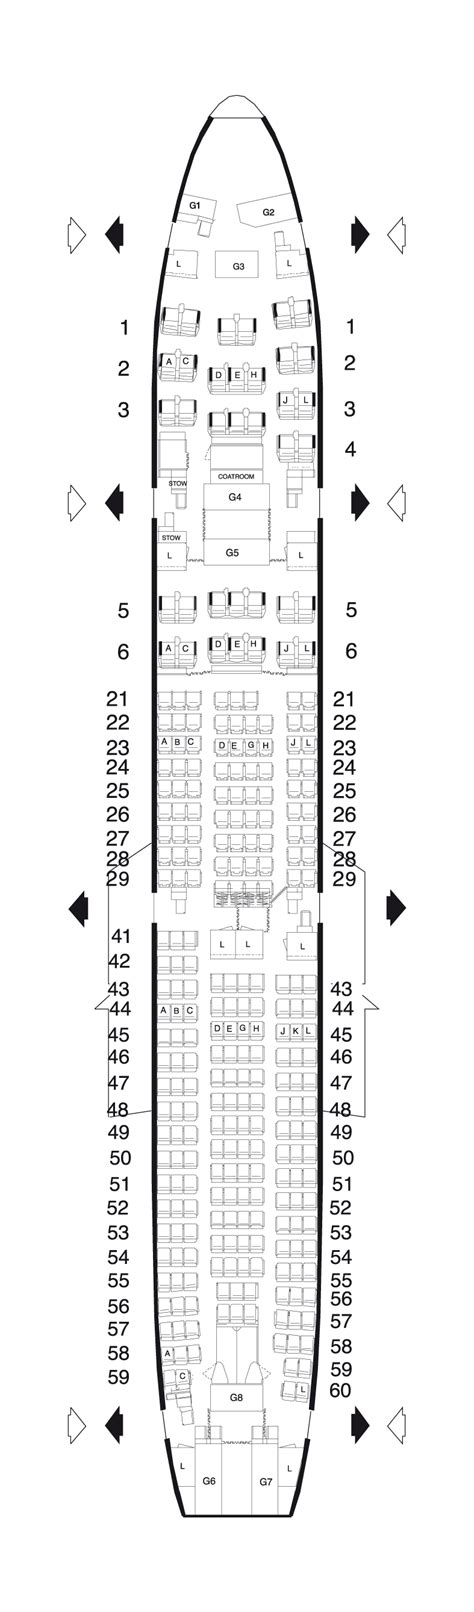 Airbus A330 Seating Chart United Airlines Bios Pics